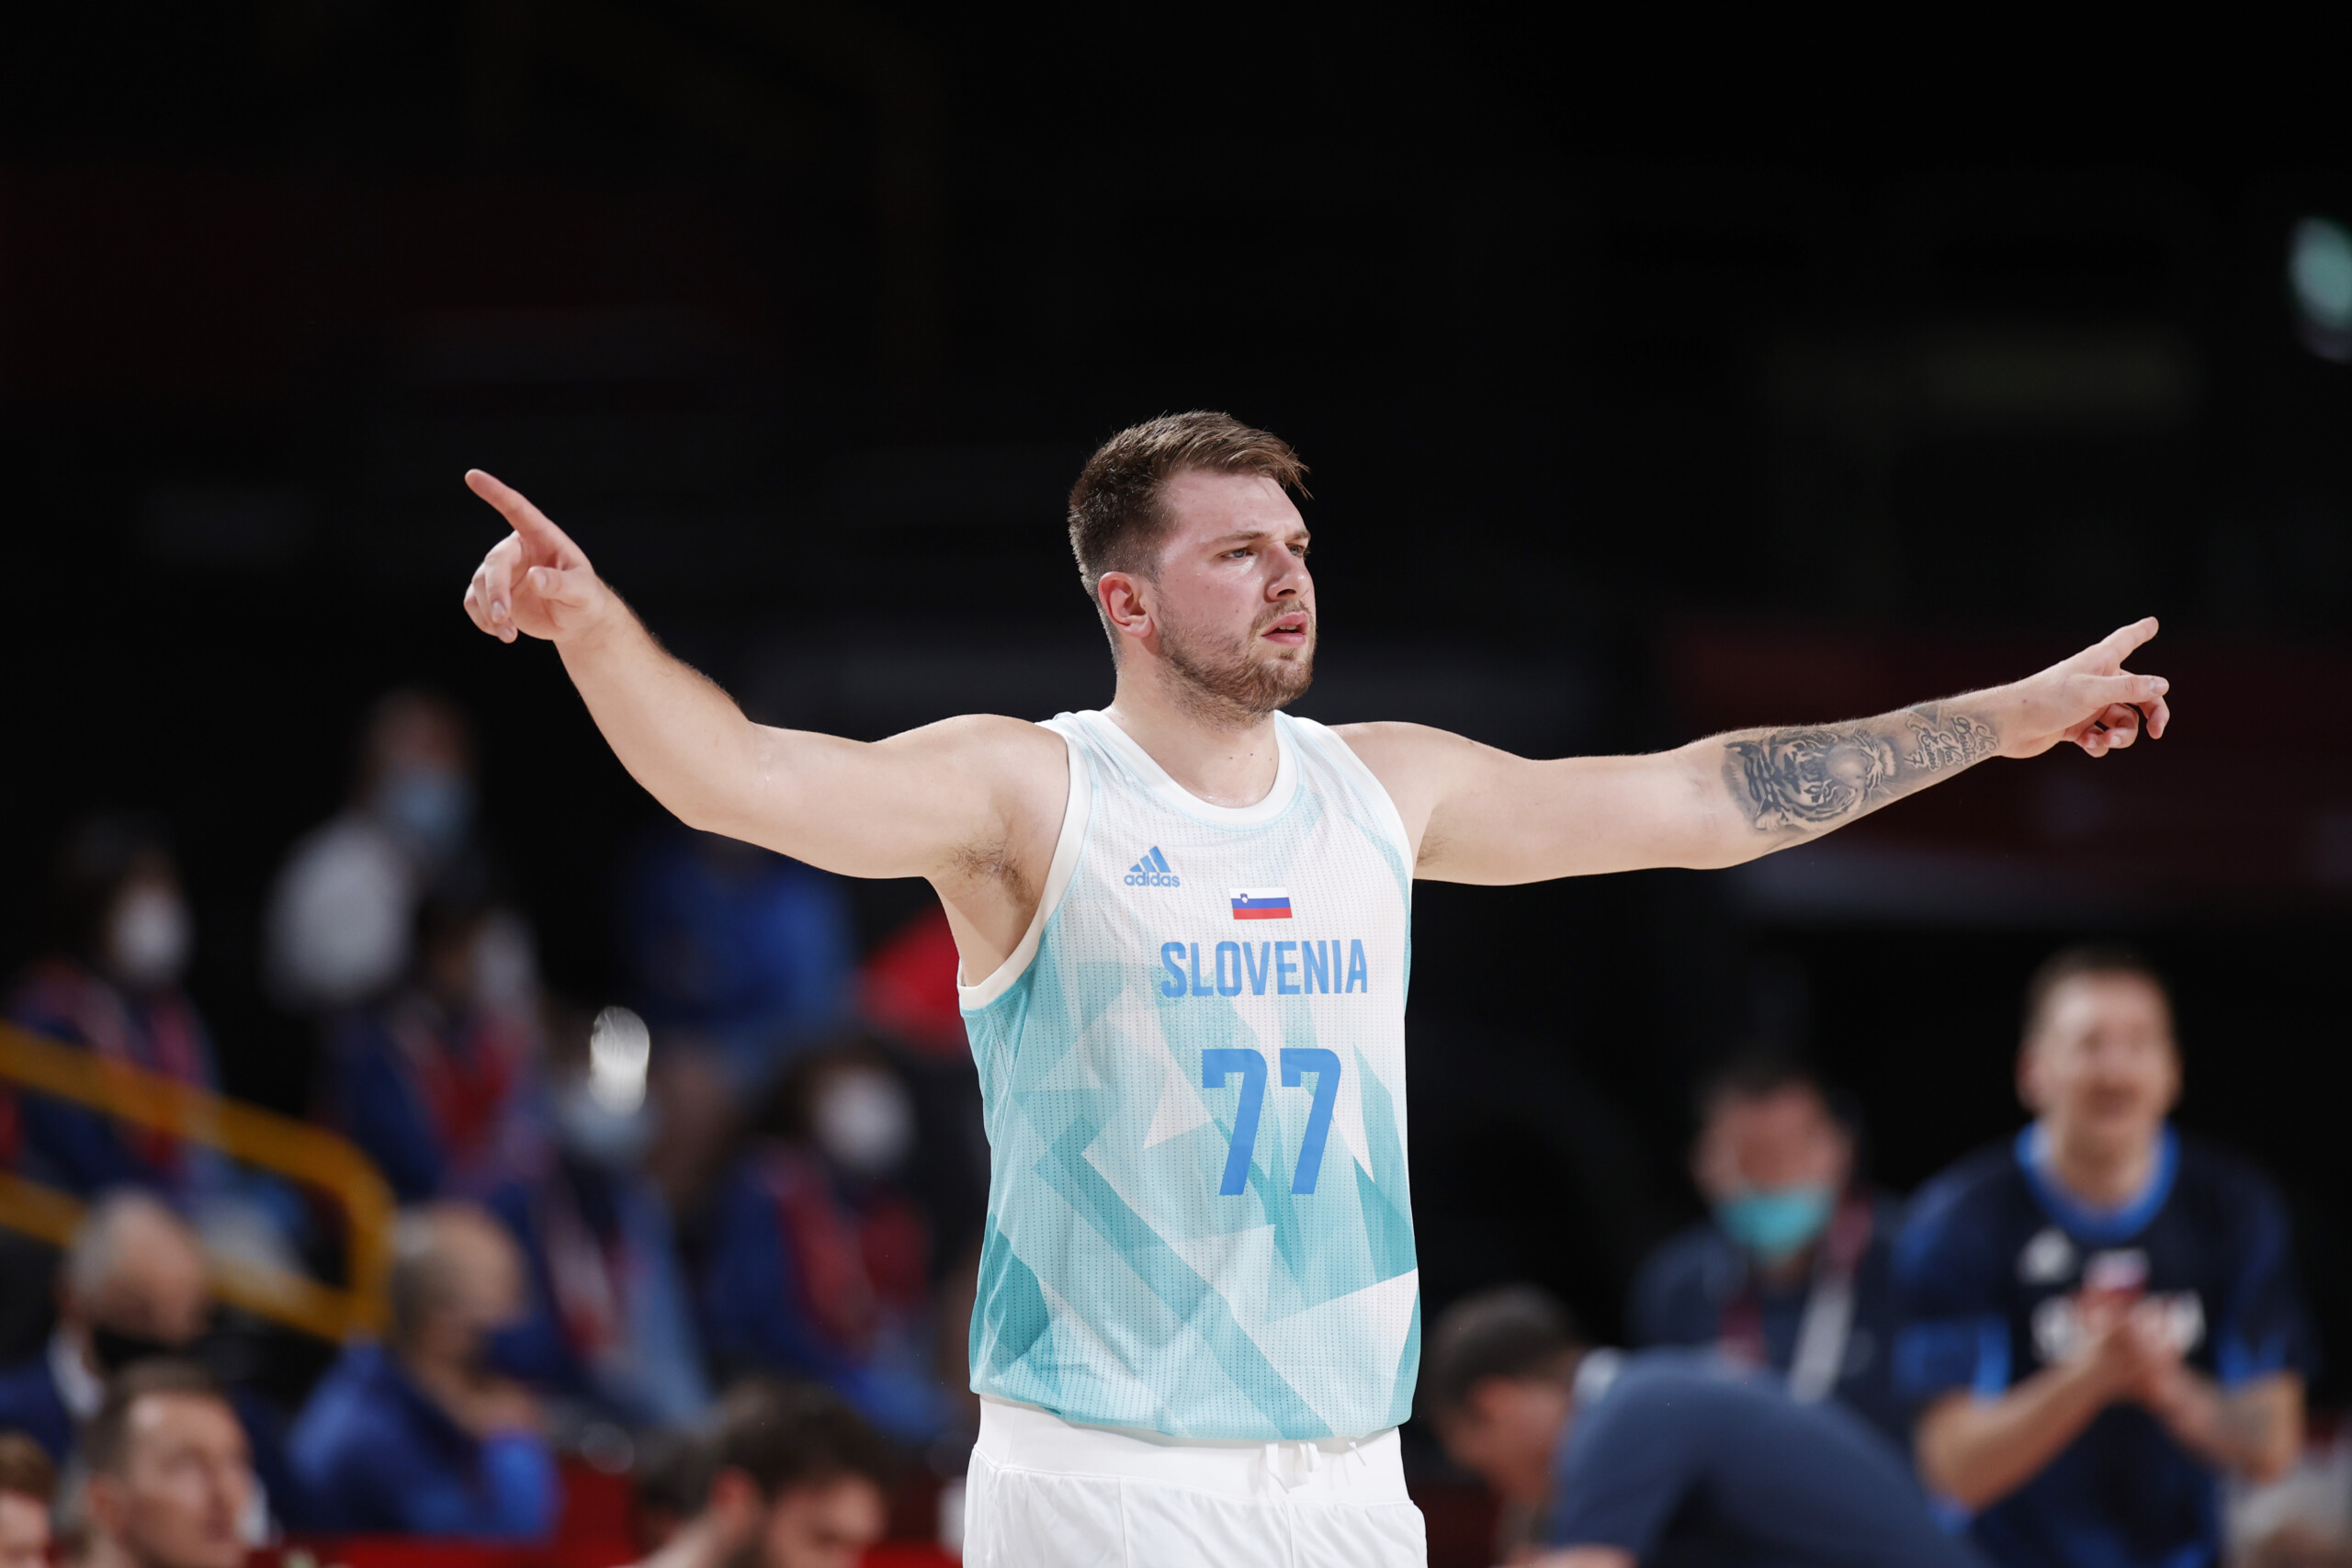 Luka Doncic forced to wear Australian Boomers jersey after losing bet